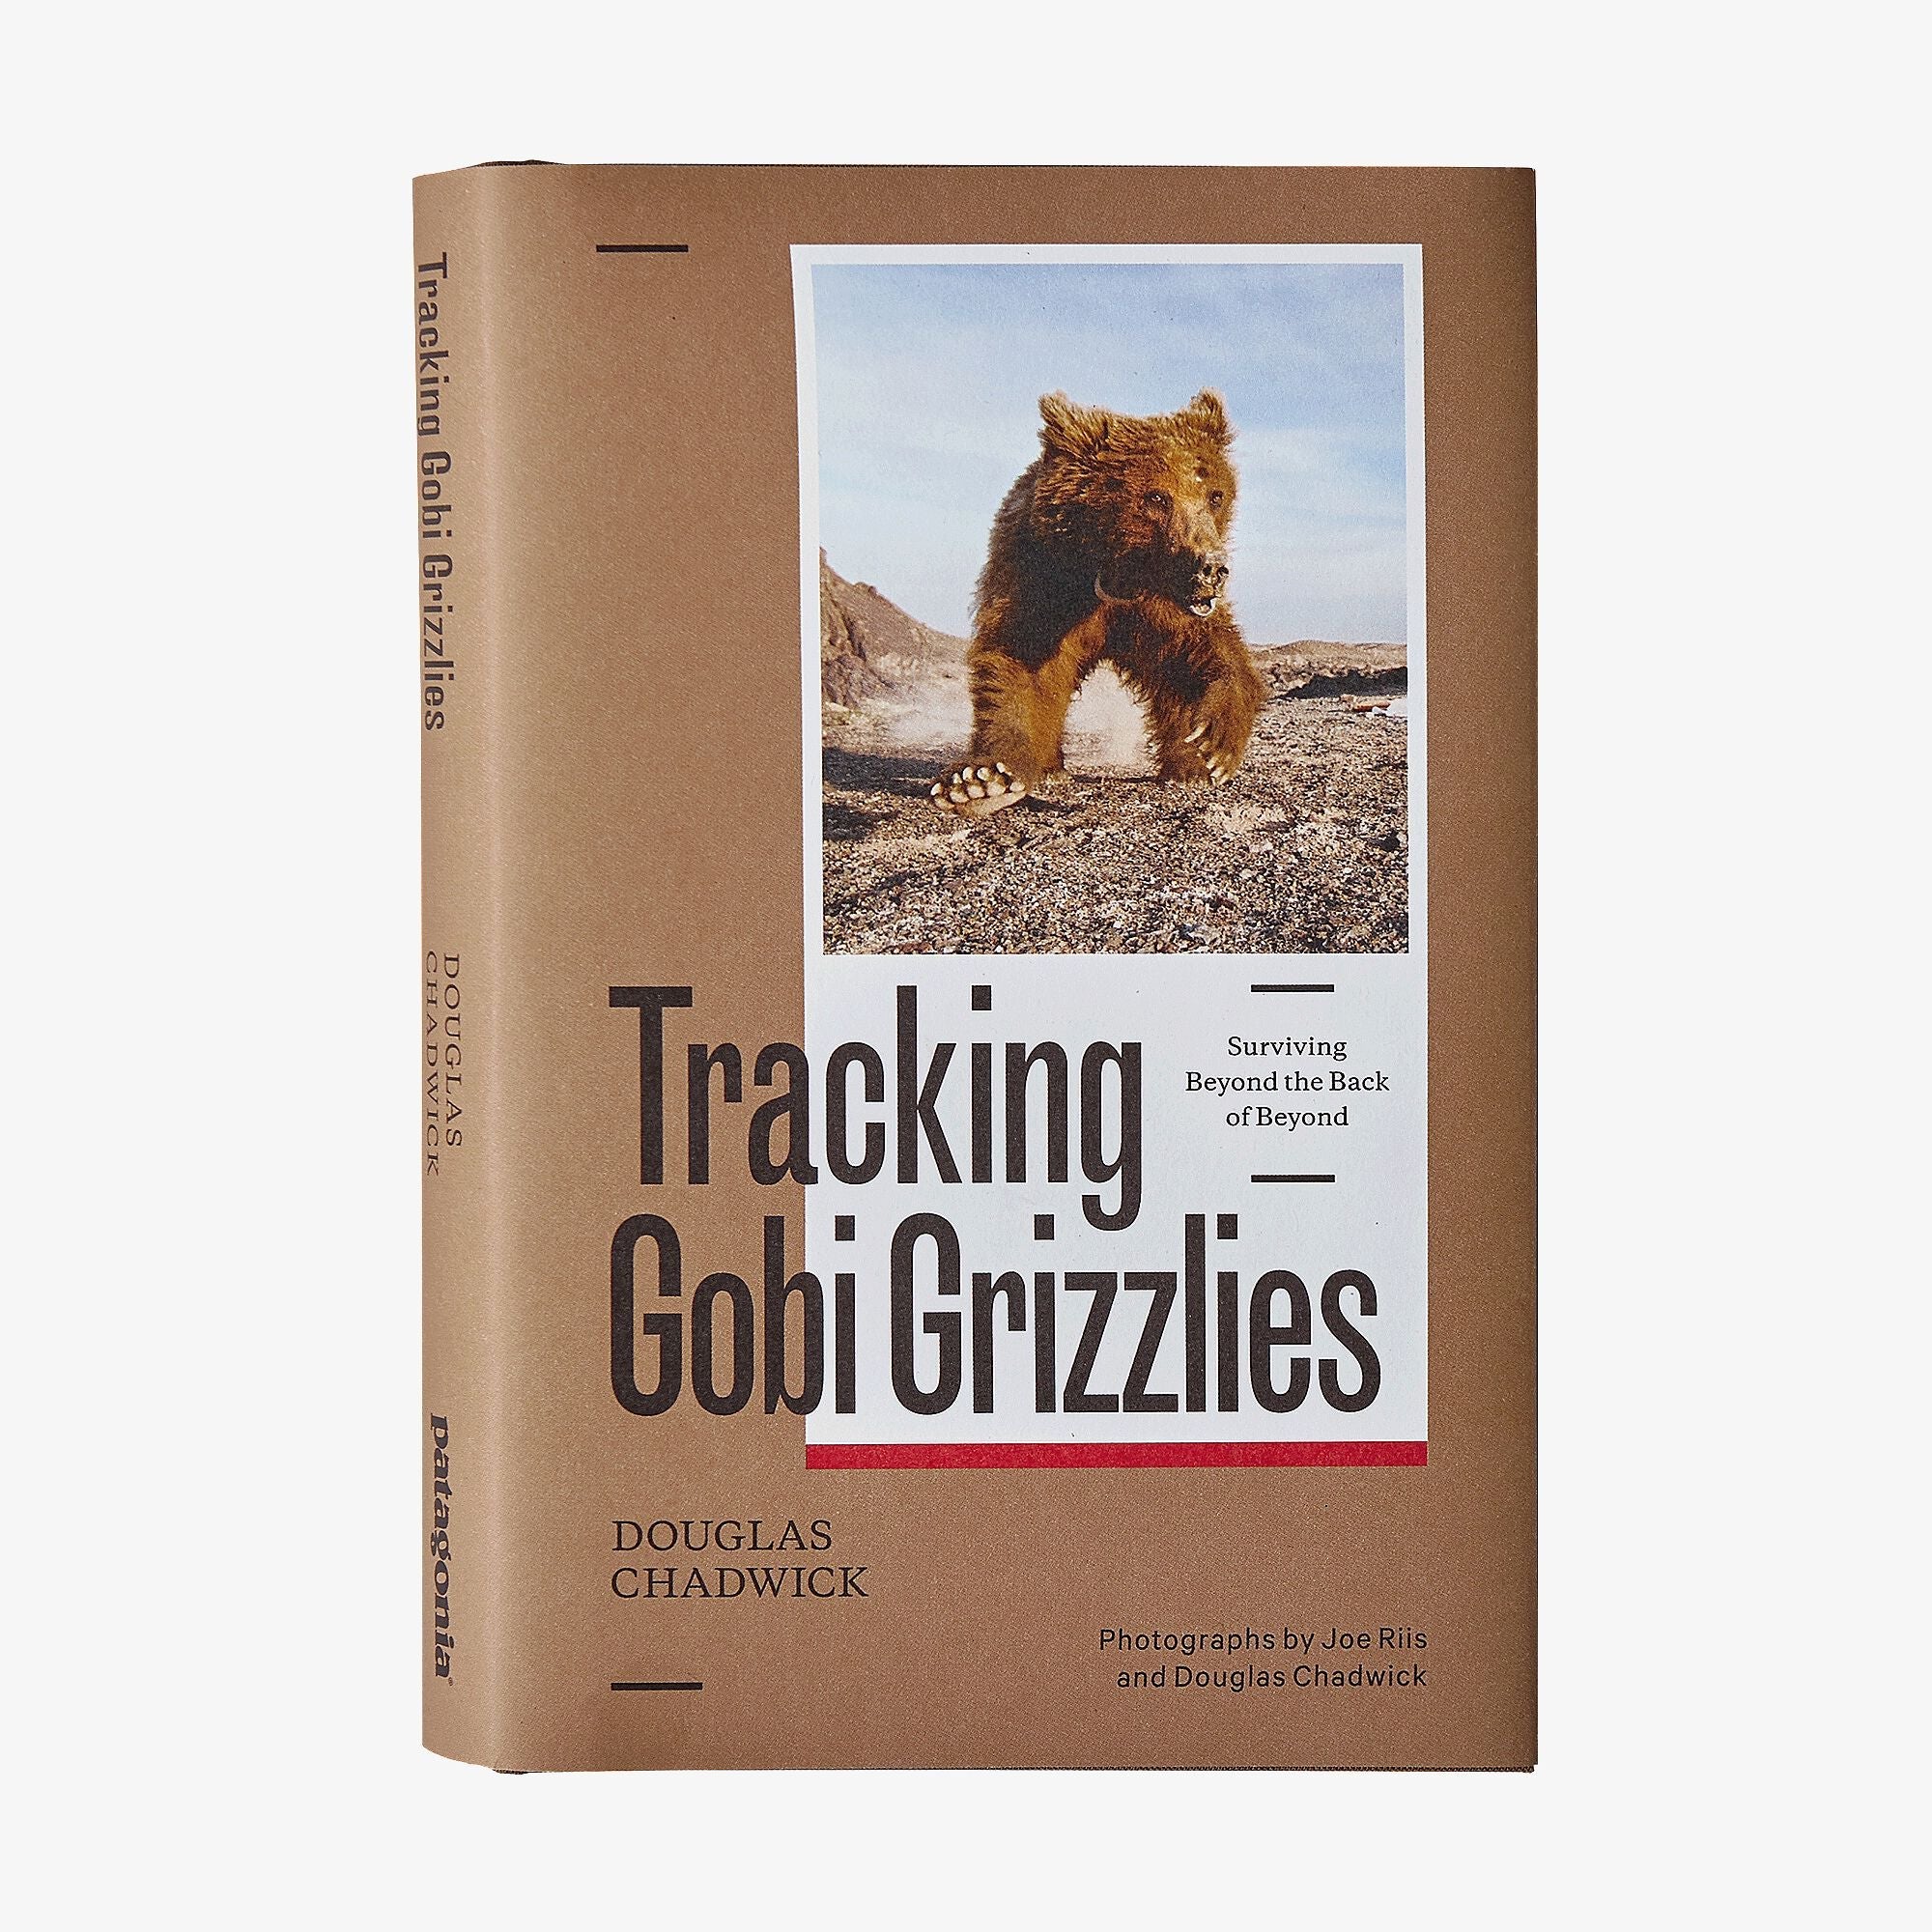 Tracking Gobi Grizzlies: Surviving Beyond the Back of Beyond by Doug Chadwick in One Size | Patagonia Bend